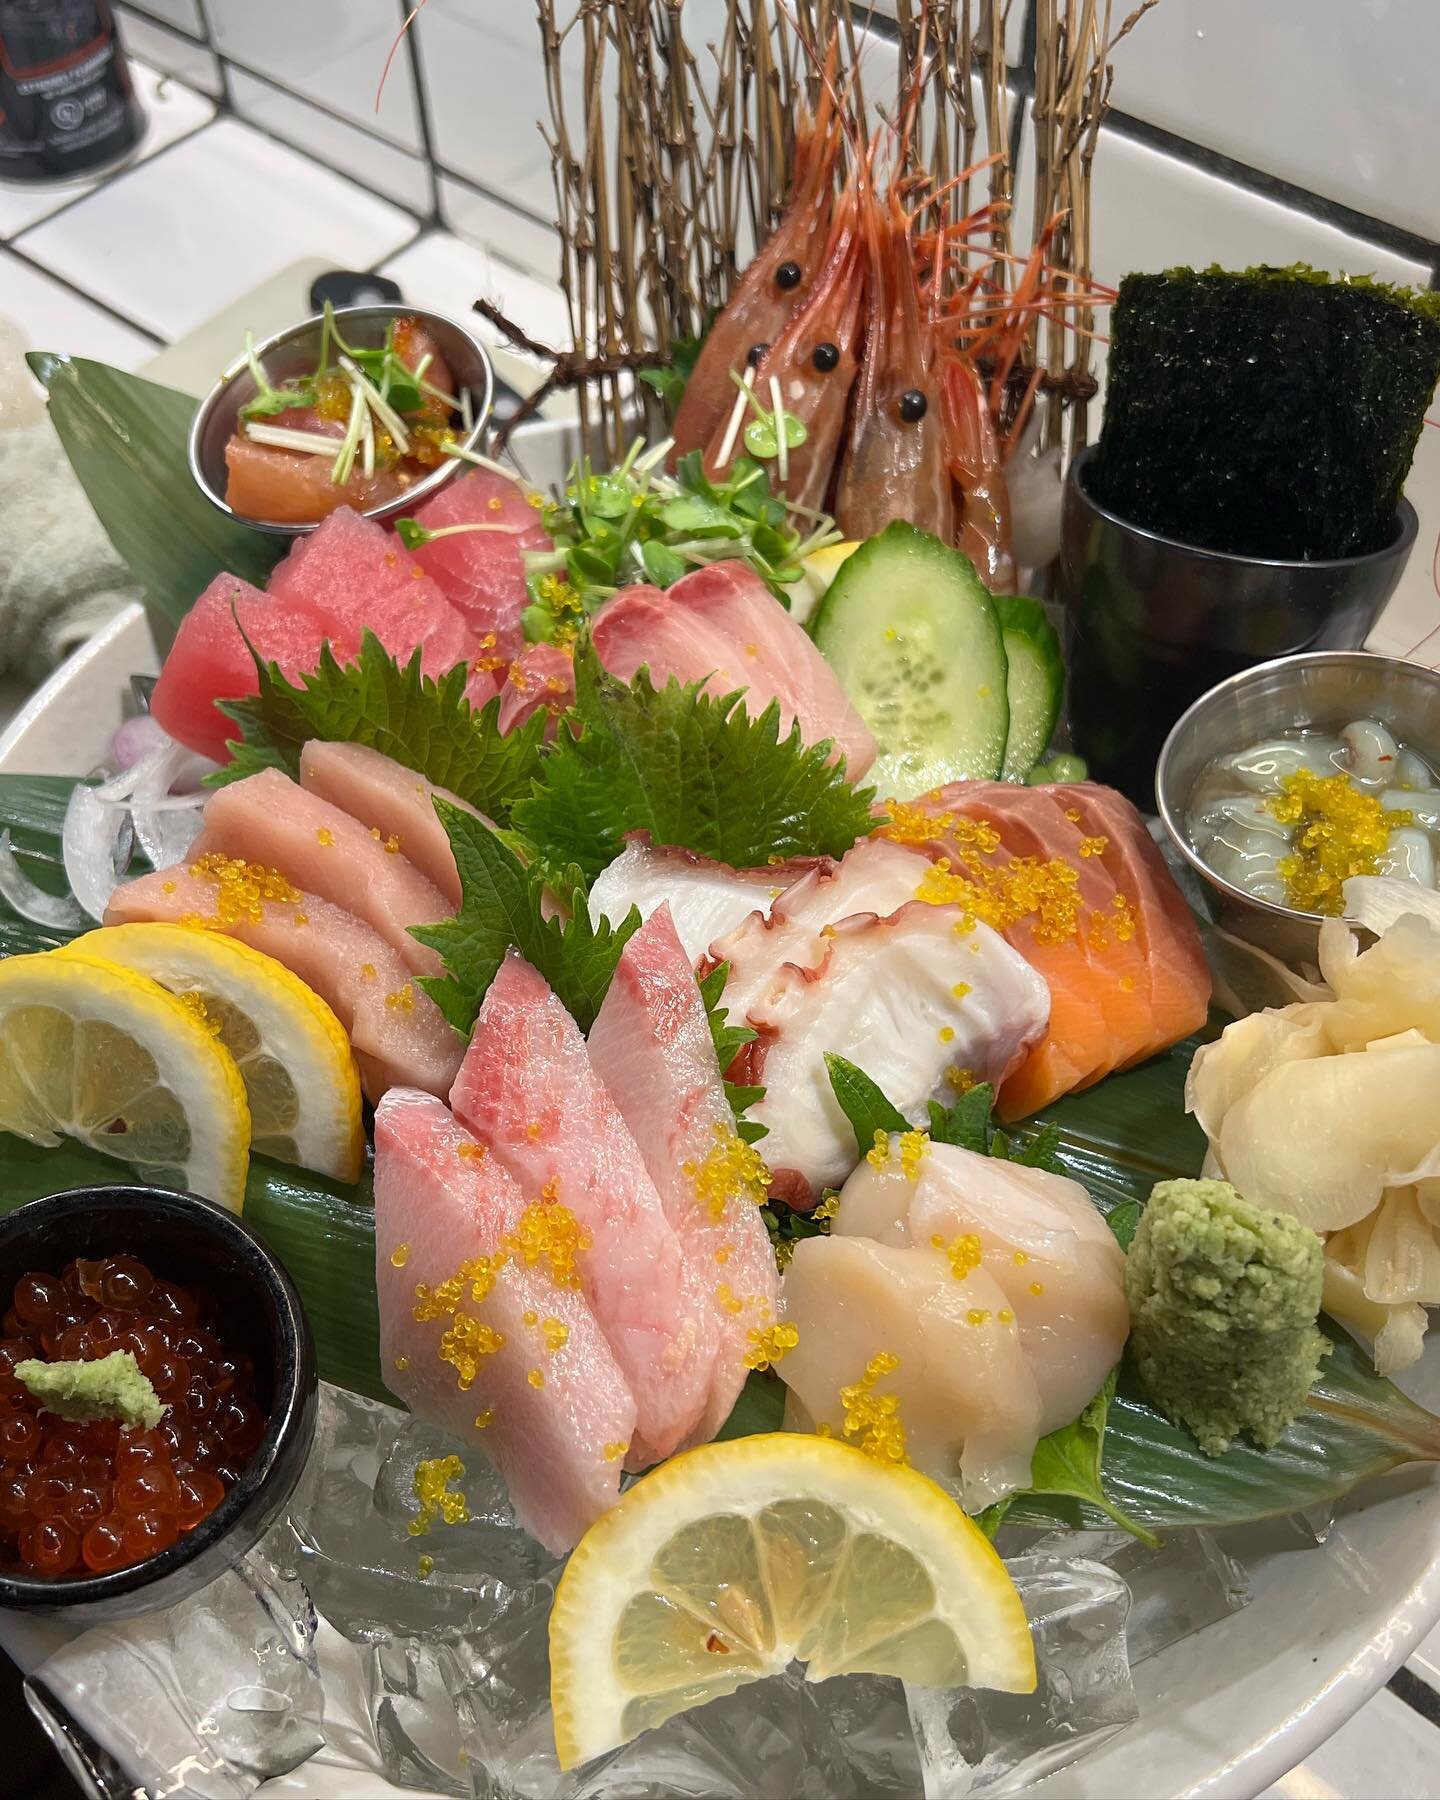 Good #sundayfunday morning!!

Our take out Sweets window @baitenseattle offers #dinein only Sashimi and Bento lunch special today from 12pm to 3pm.

Let's enjoy one #summer day on #capitolhillseattle !!
.
.
.
#seafoodlovers 
#market
#sashimi
#bluefin